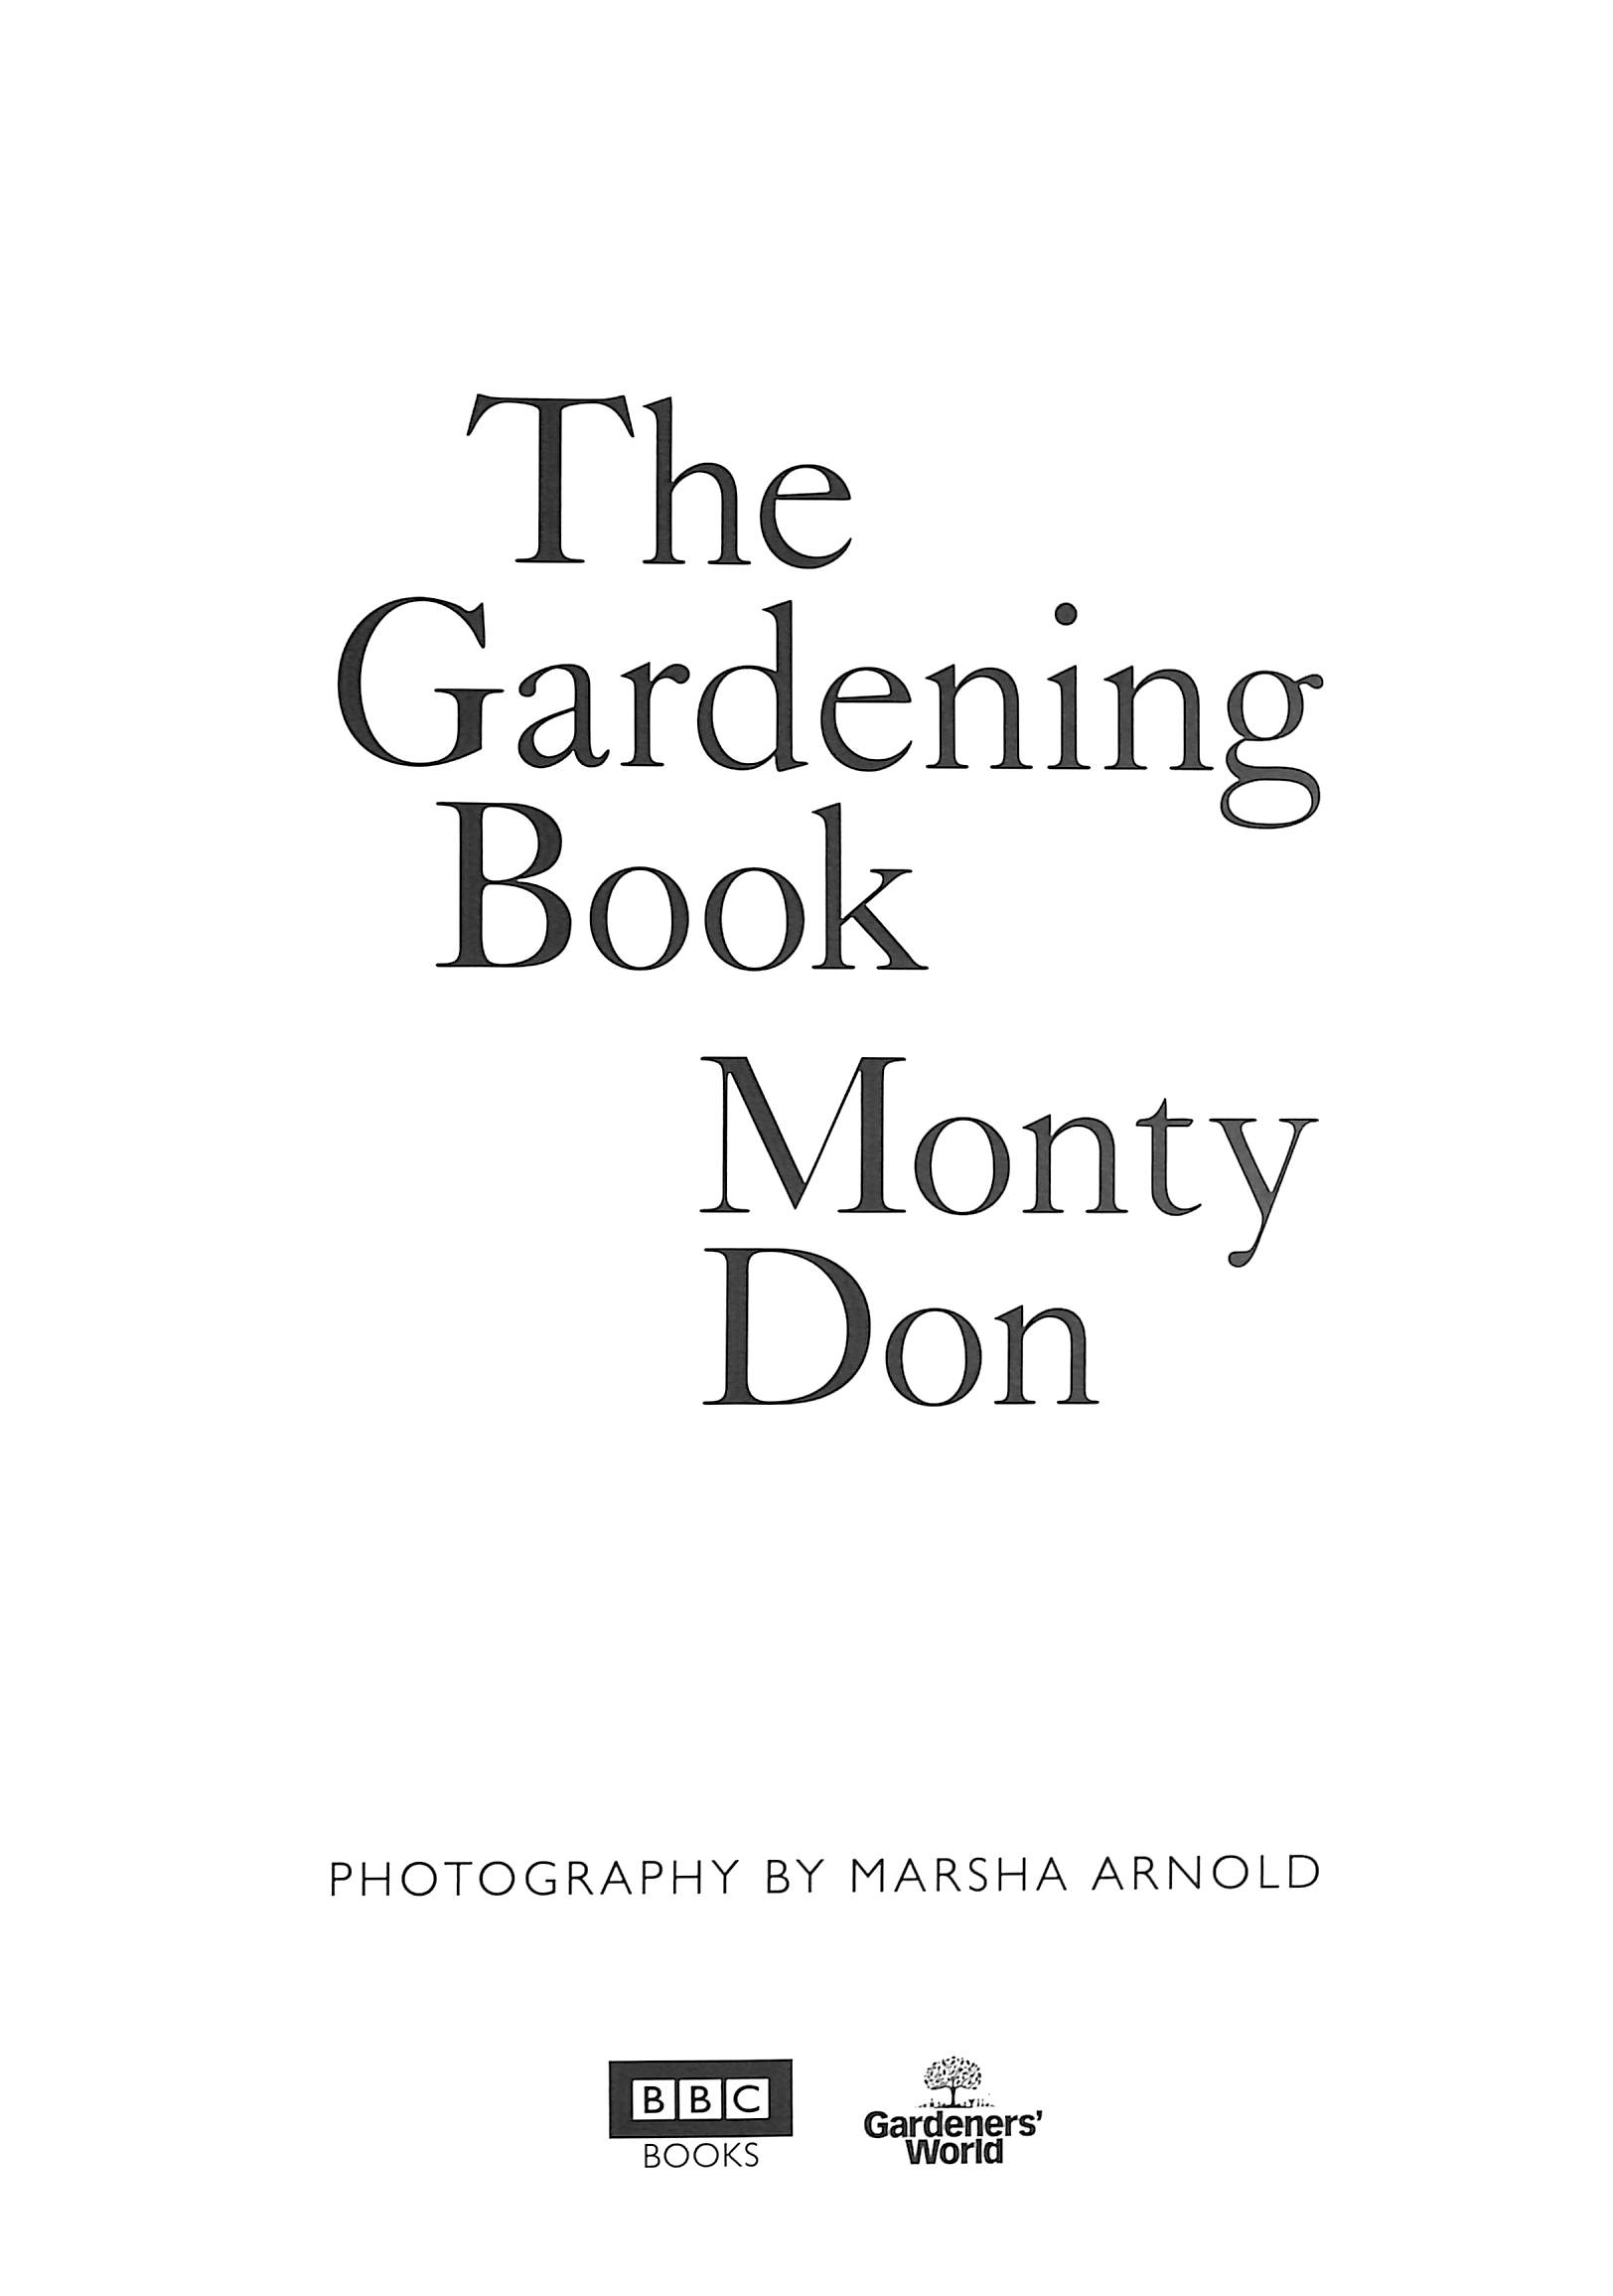 The gardening book by Monty Don